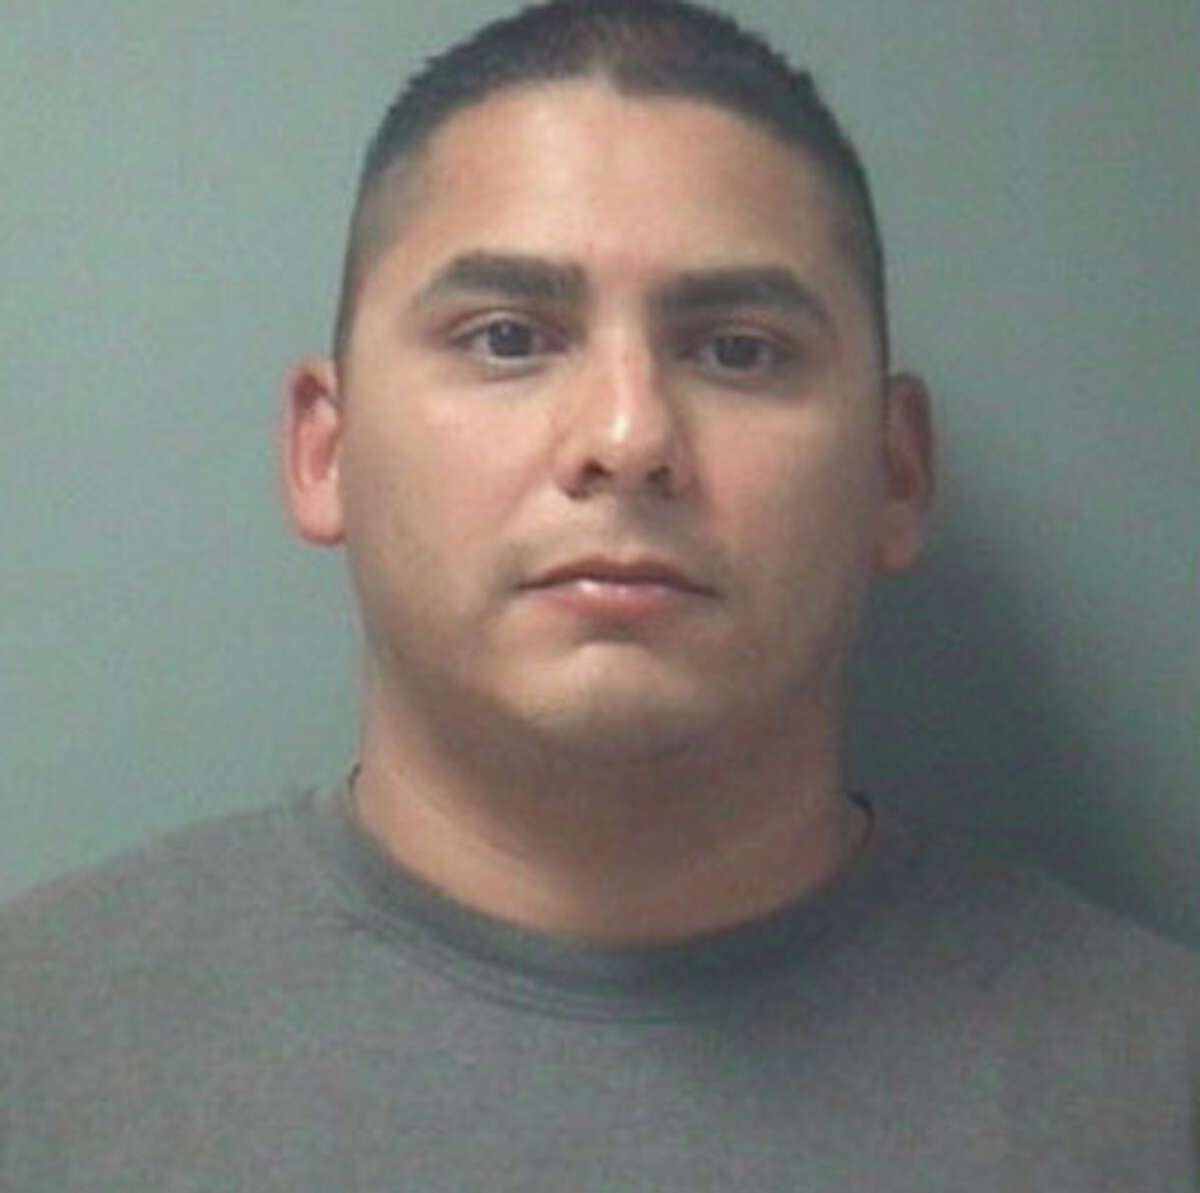 Ruben Orneals, a former Galveston County deputy pleaded guilty in January to asking a 14-year-old girl for sex online and sending her sexually-explicit text messages. He was indicted in November 2016.